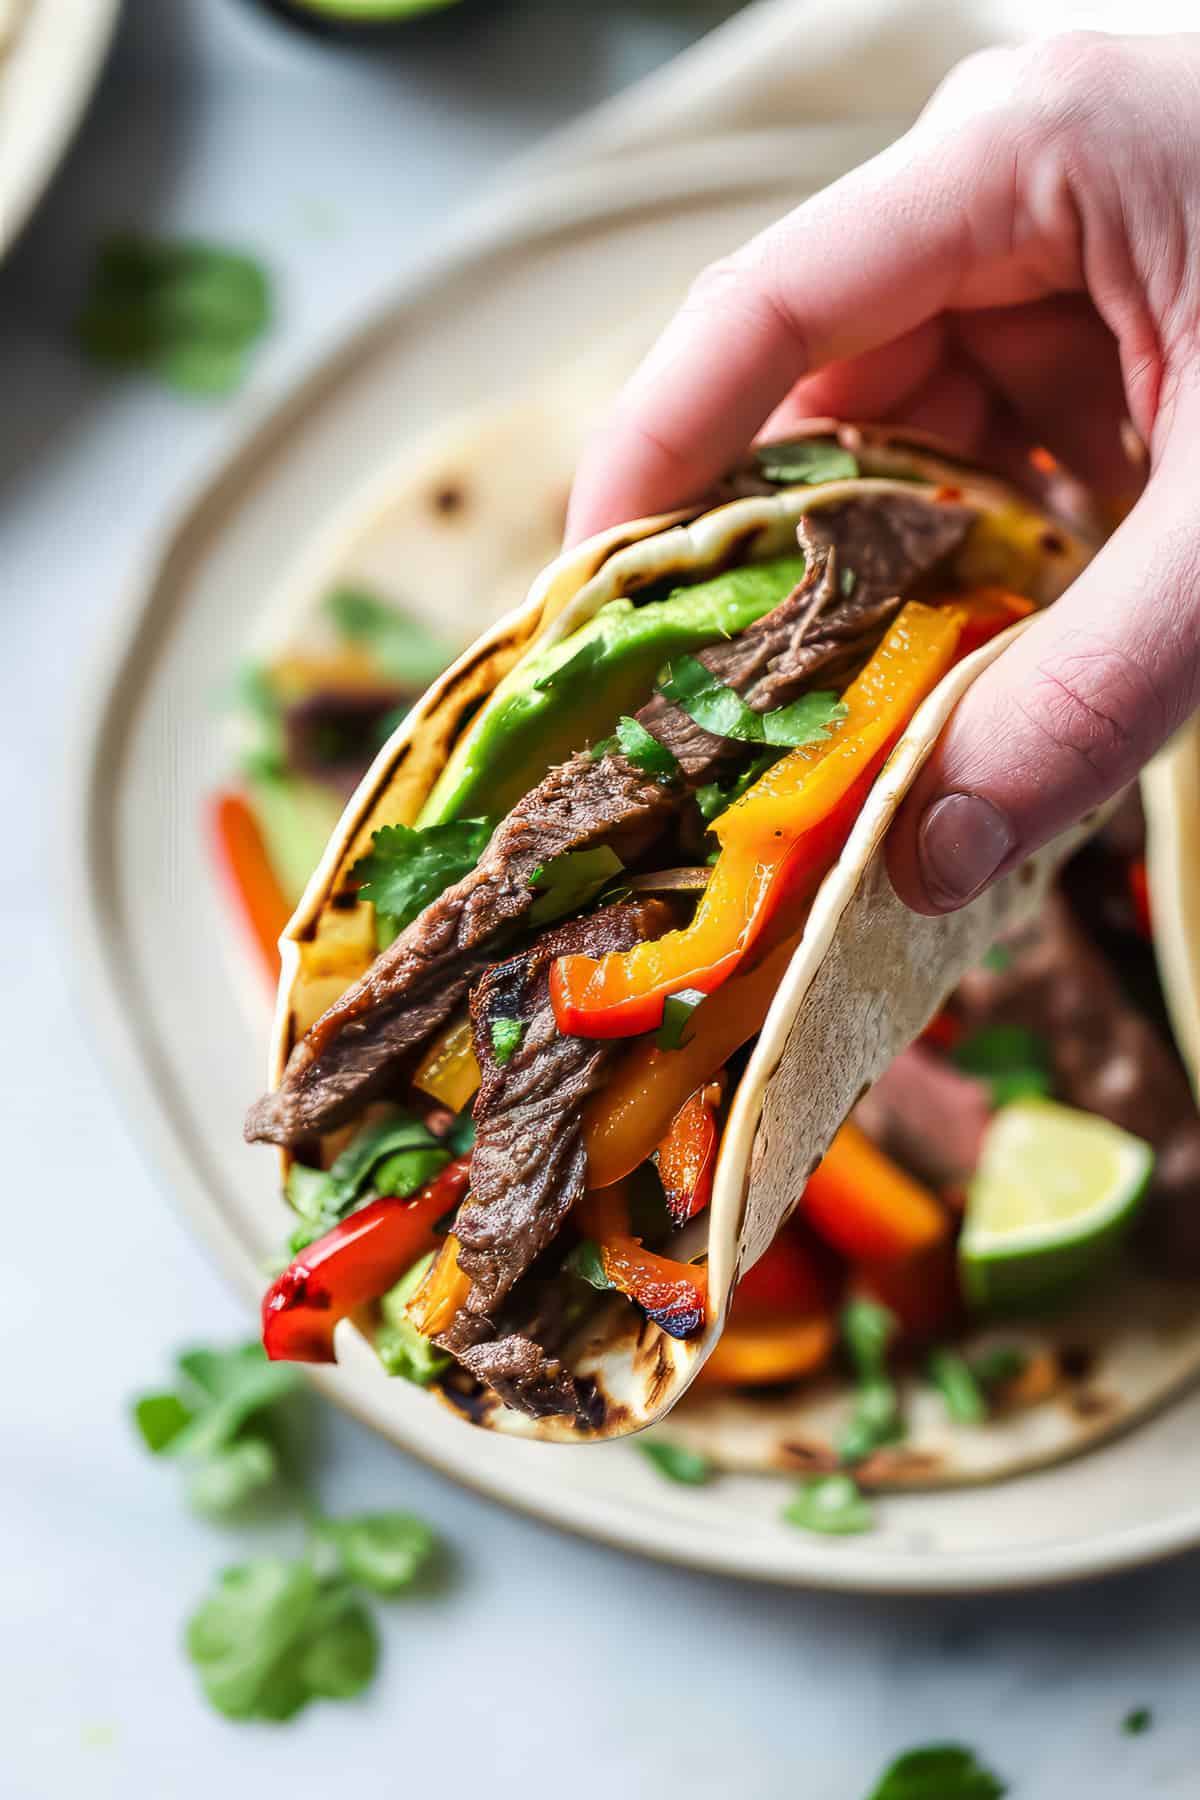 Marinated flank steak fajitas with peppers and avocado.